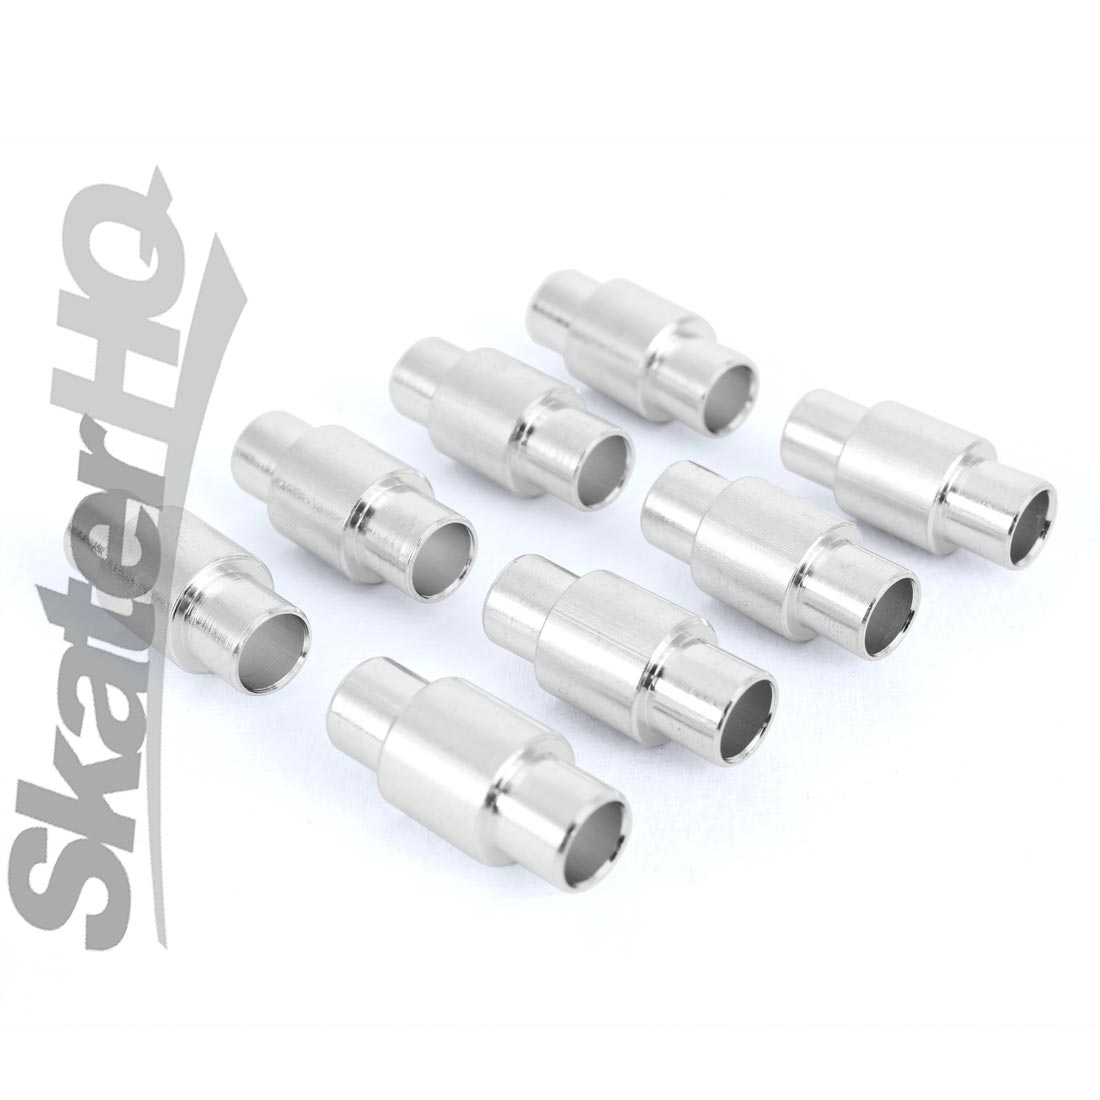 Mission bearing 608 Spacer 8pk Inline Hardware and Parts